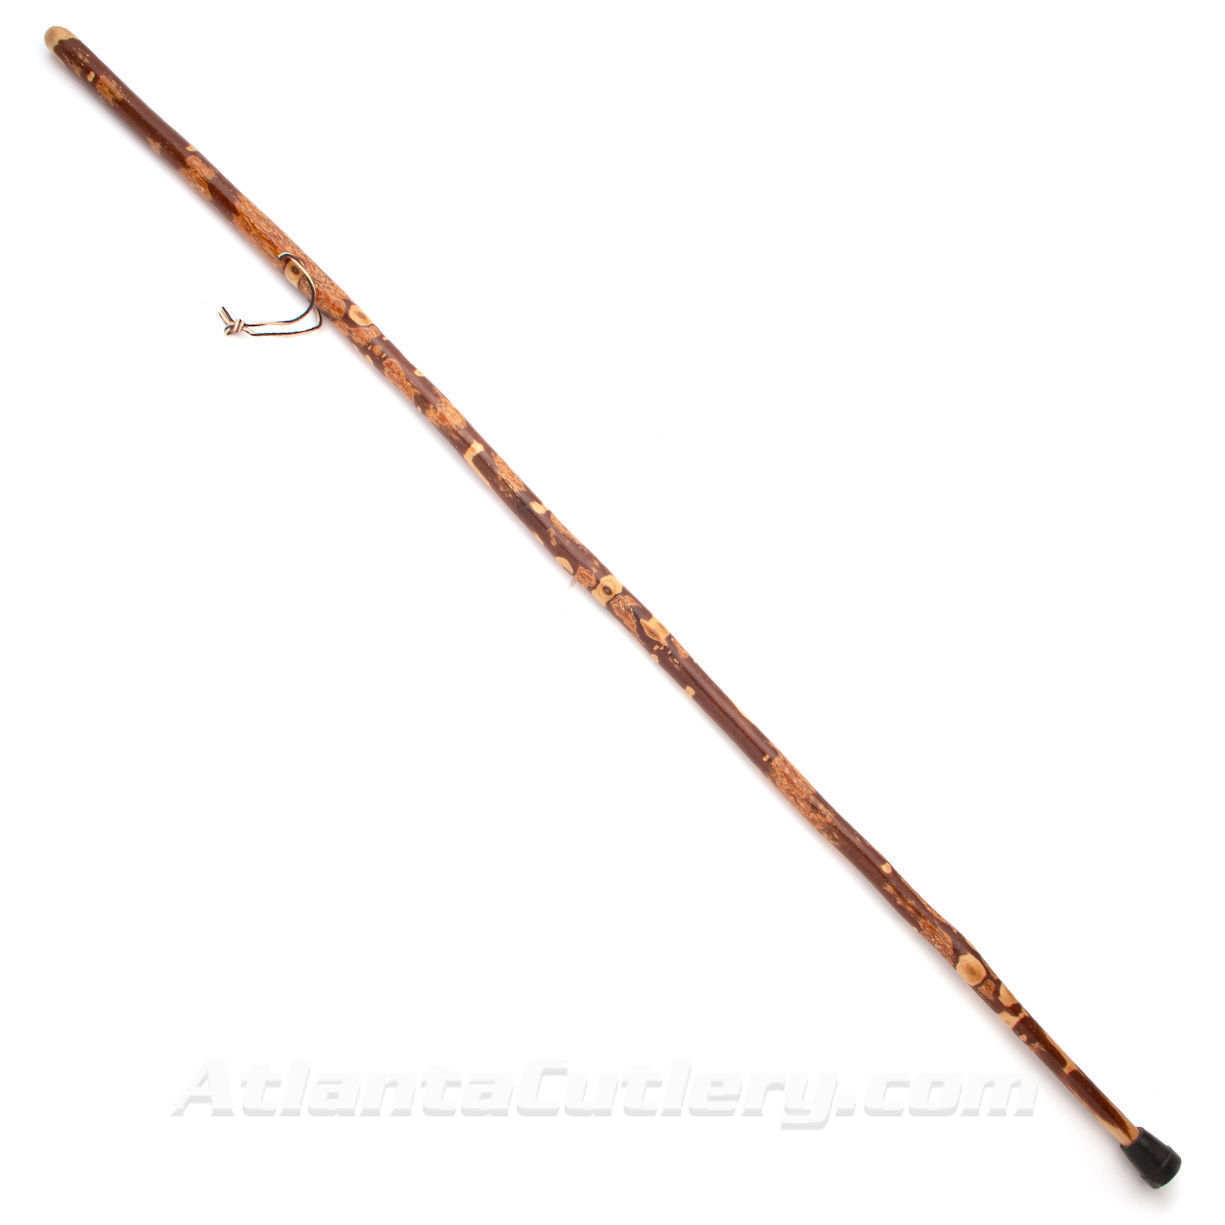 Whistle Creek Hiking Staff in variegated Sassafras with rubber tip and leather wrist strap,  Weatherproof finish. Made in USA